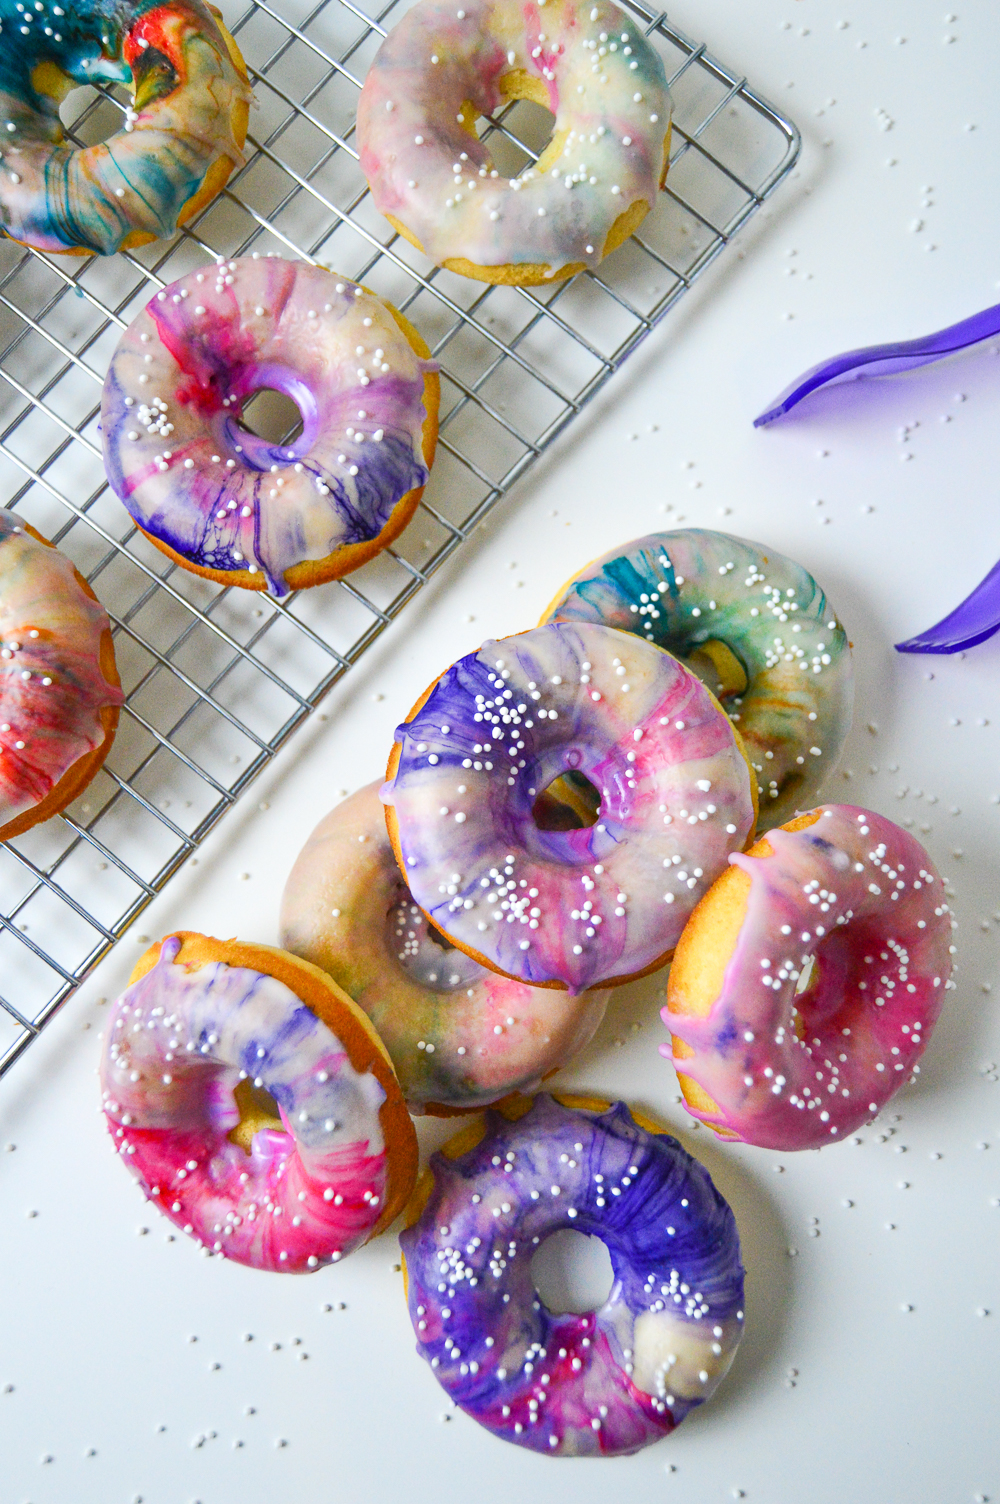 Marbled Donuts | Club Crafted